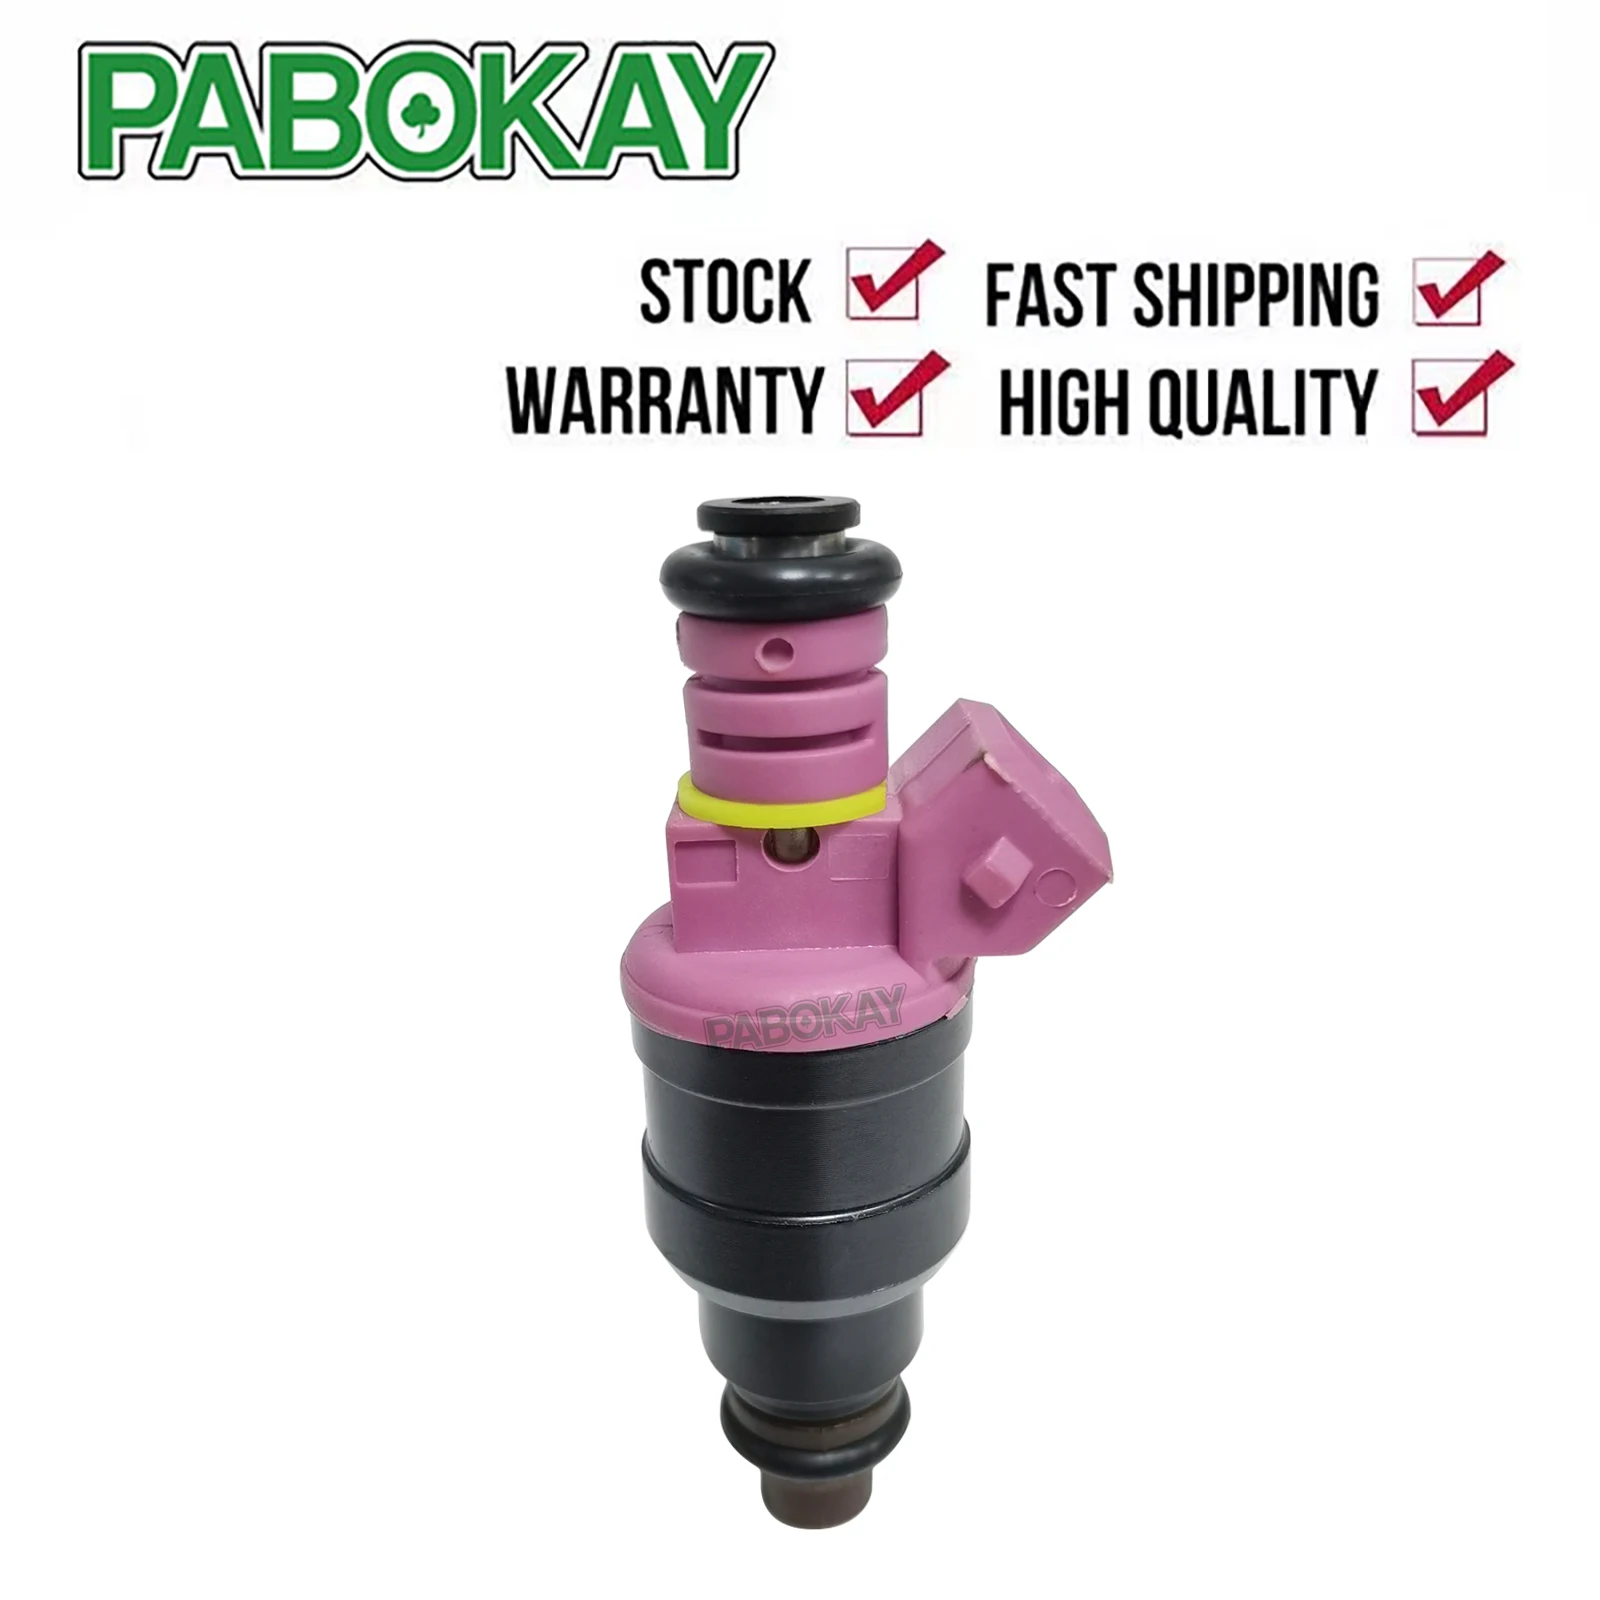 

Fuel Injector E5TE-A3B V8 For Ford Trucks 1 YEAR WARRANTY 0280150943 0280150556 0280150939 0280150909 82211124